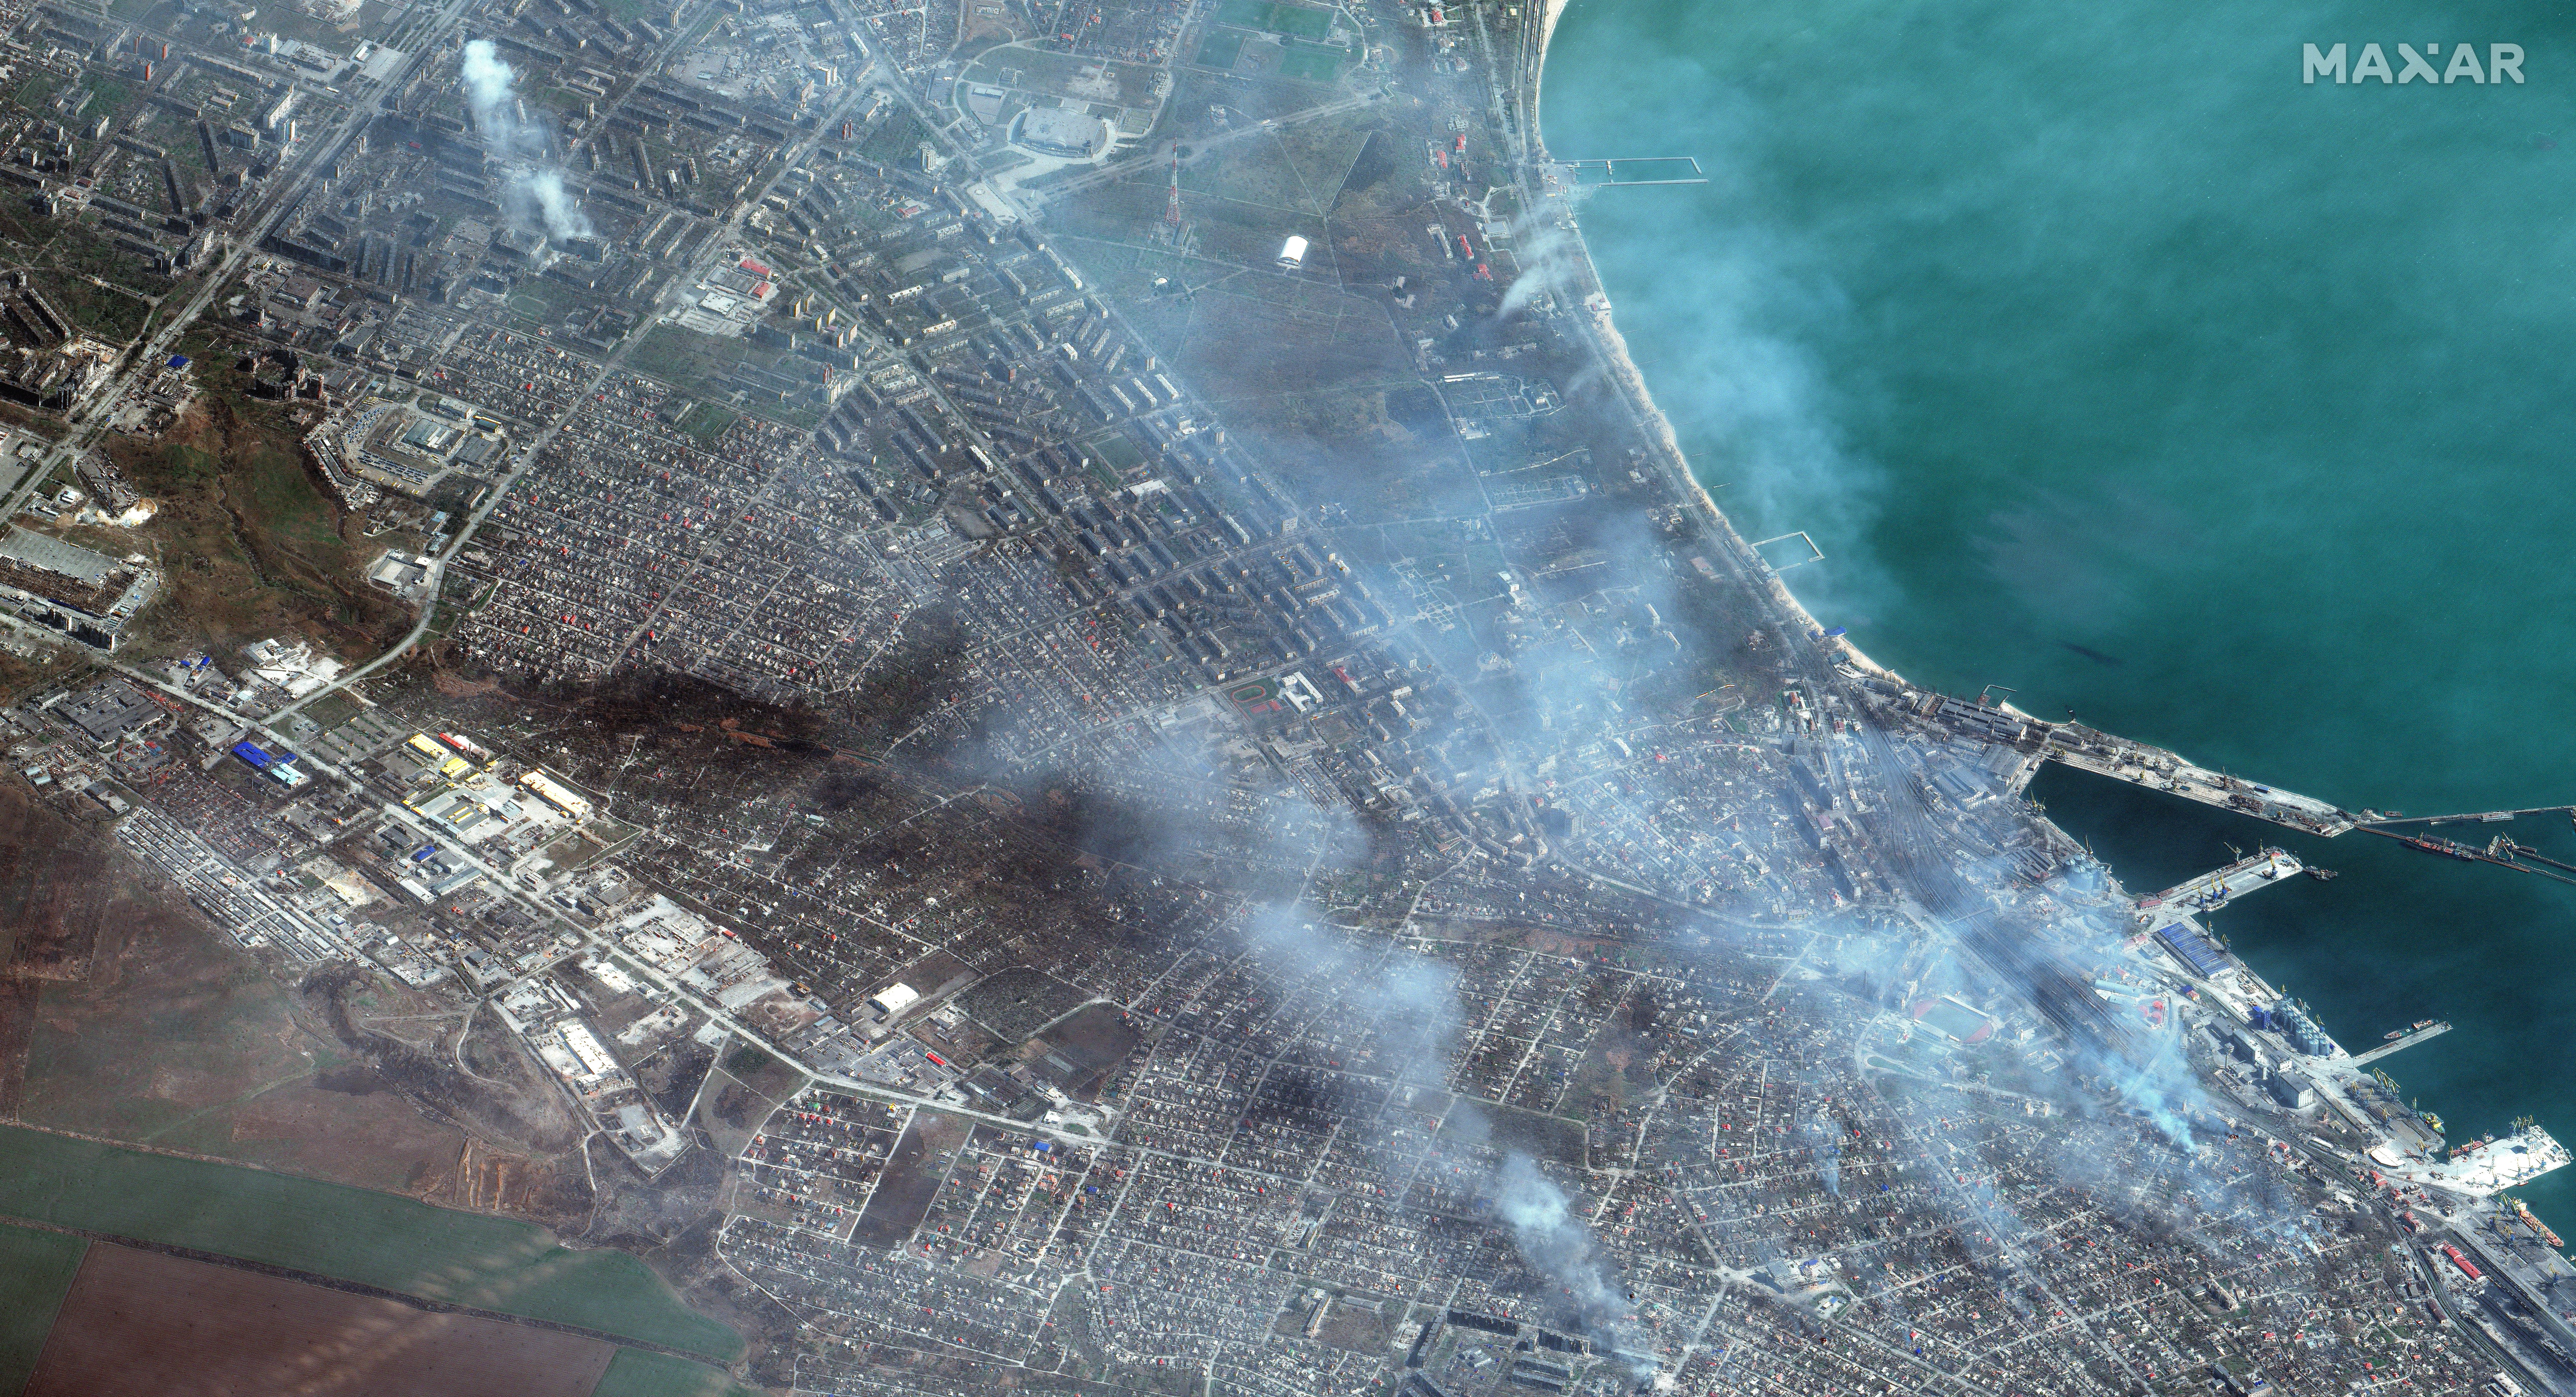 An image showing buildings on fire Ukraine, captured on April 12.